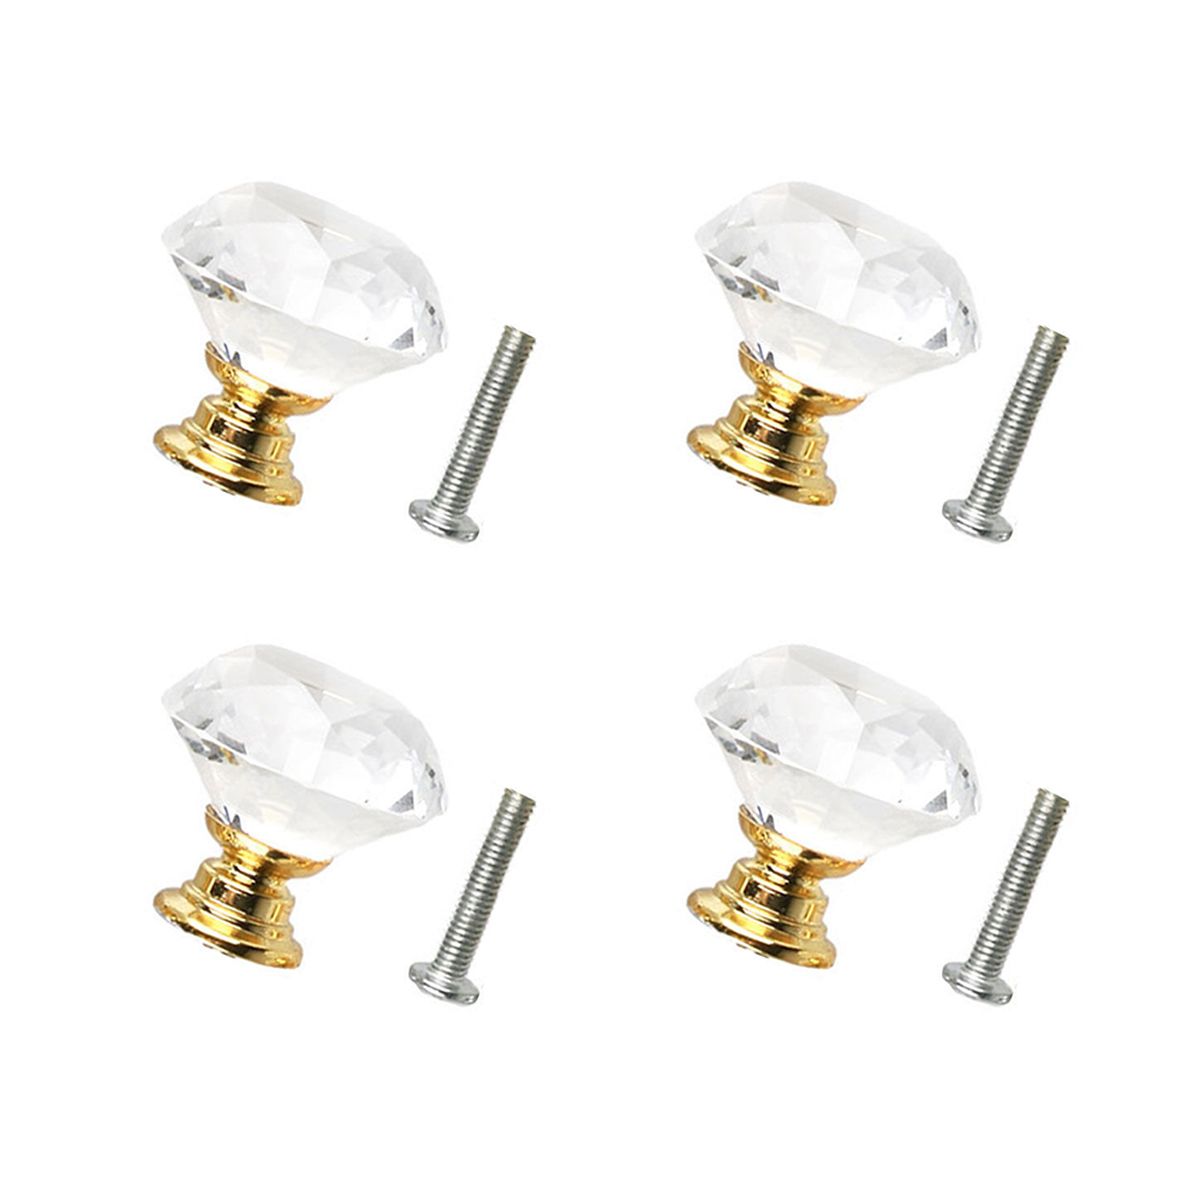 1410PCS-Gold-Base-30mm-Clear-Crystal-Door-Knobs-Kitchen-Cabinet-Drawer-Pull-Handle-1453793